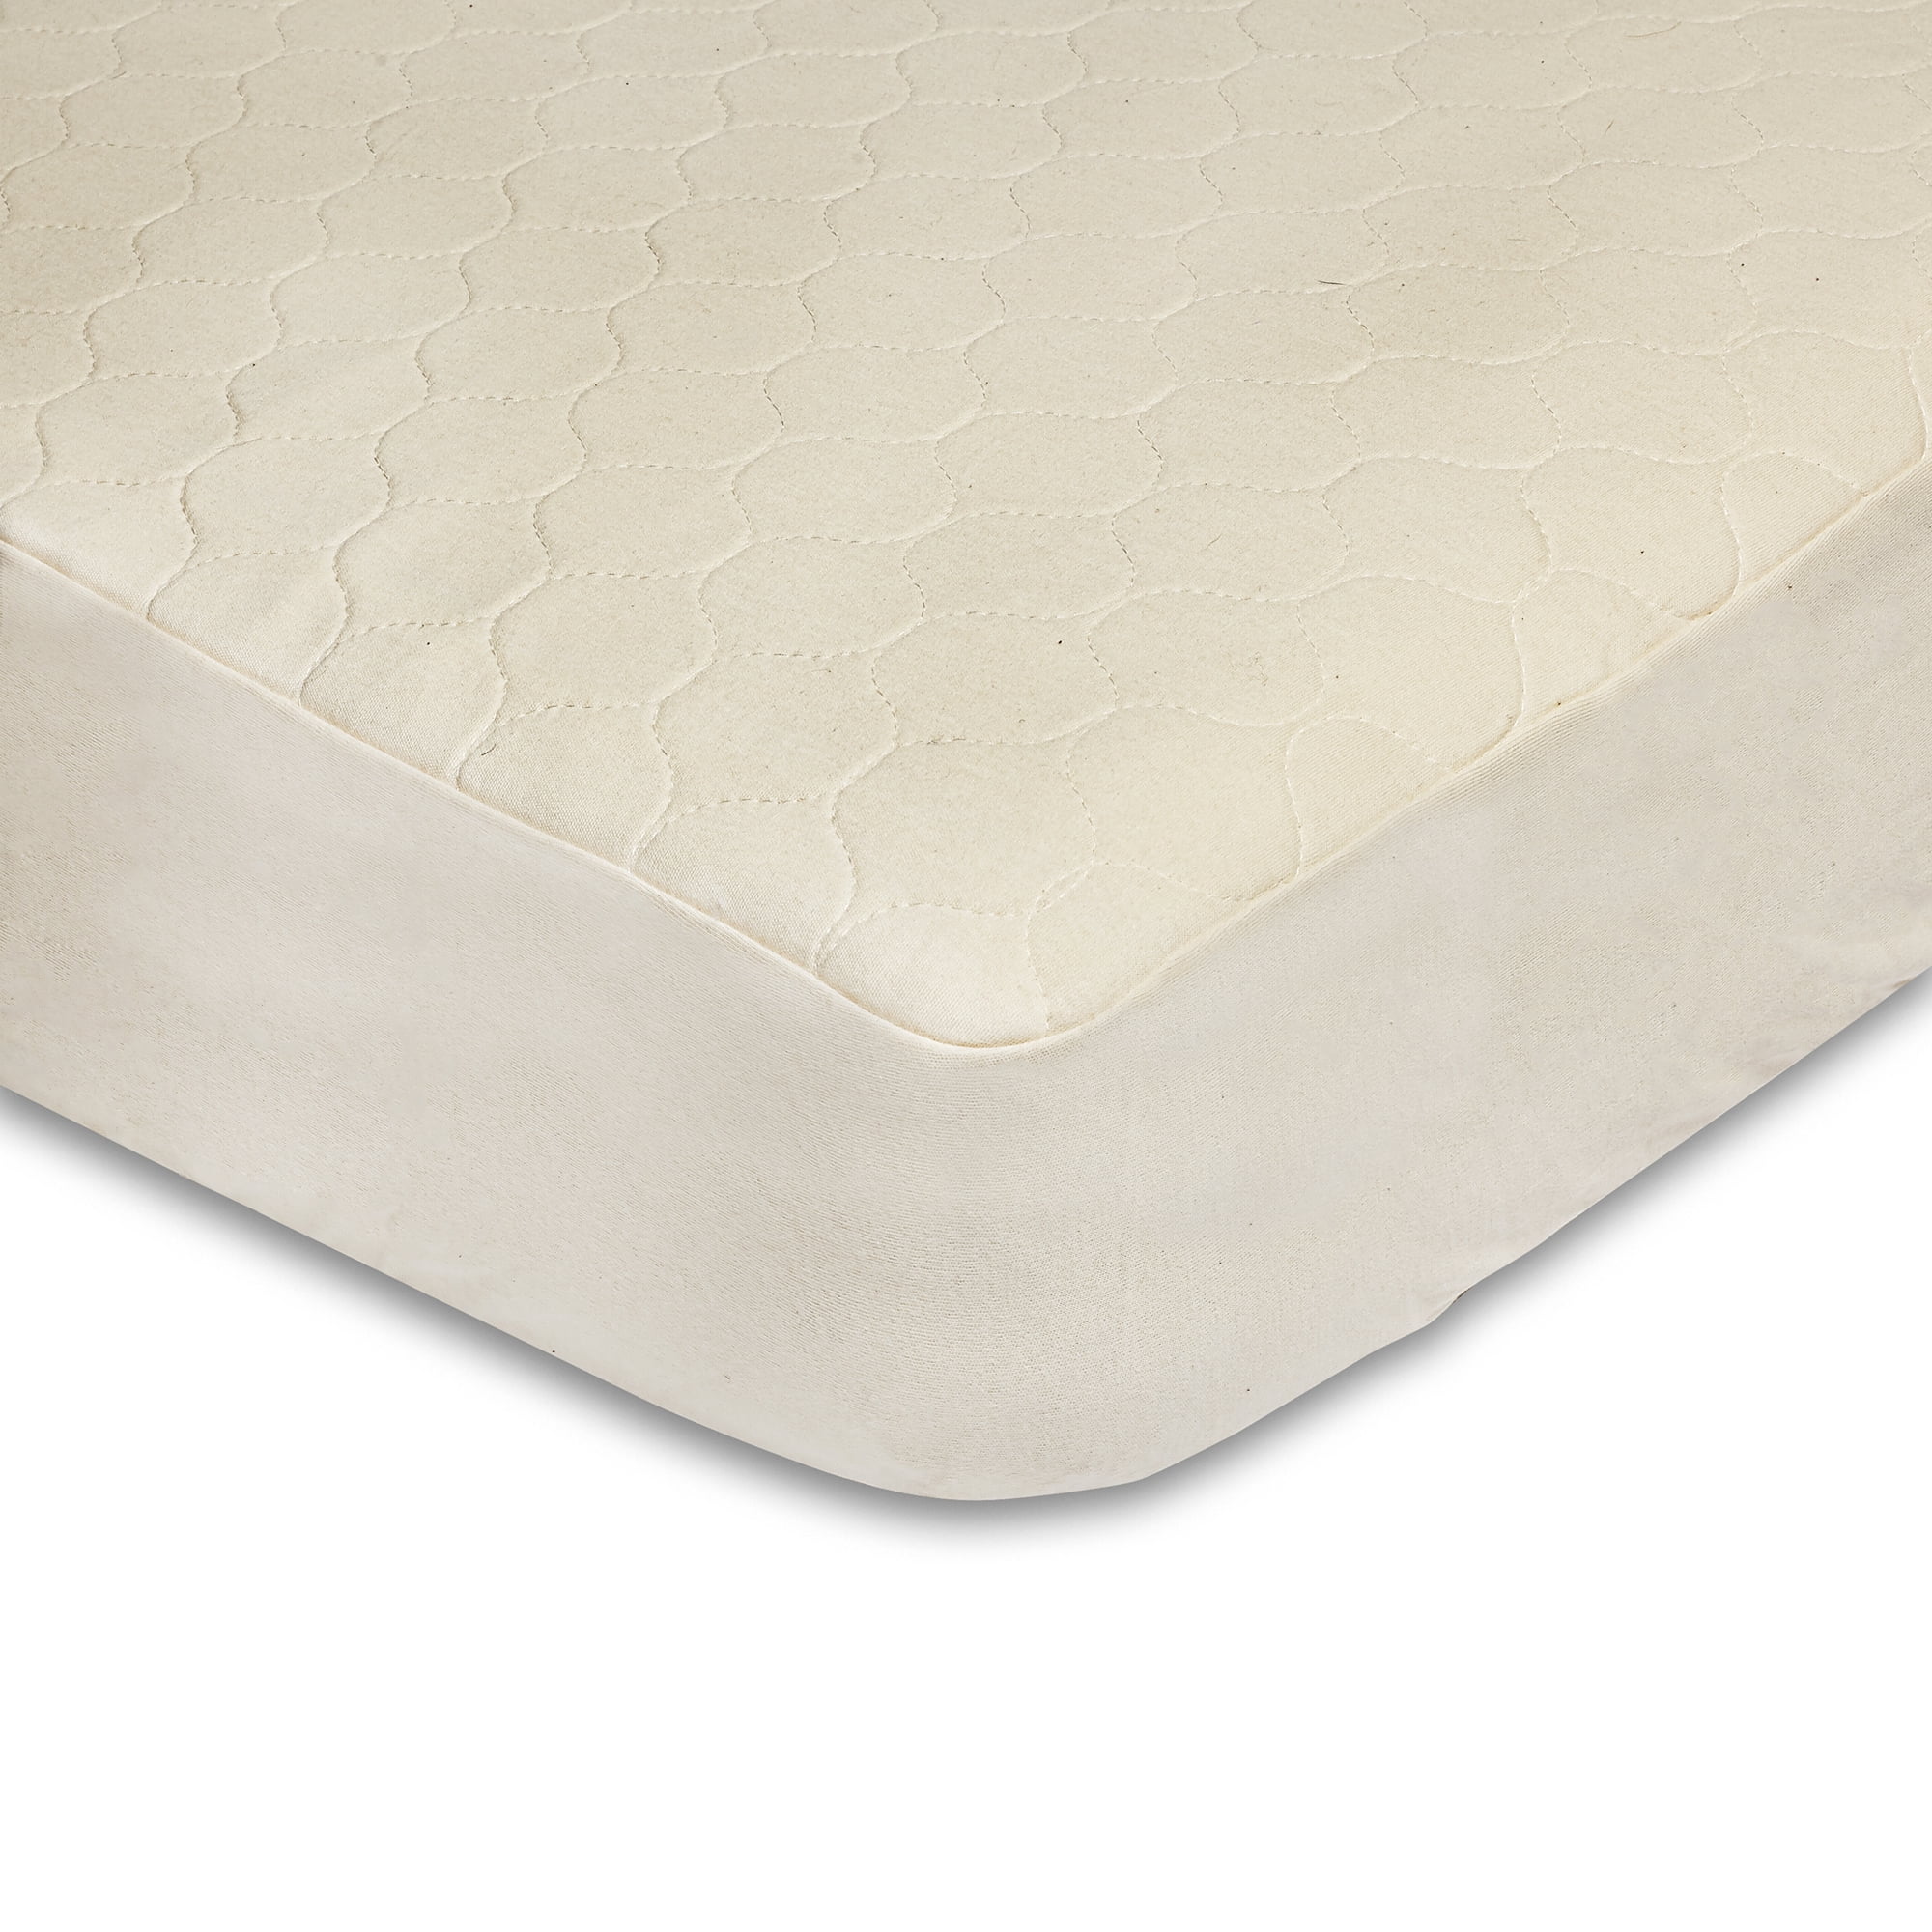 Baby Quilted Cot Junior Bed Memory Mattress Fully Fitted Waterproof All Sizes 